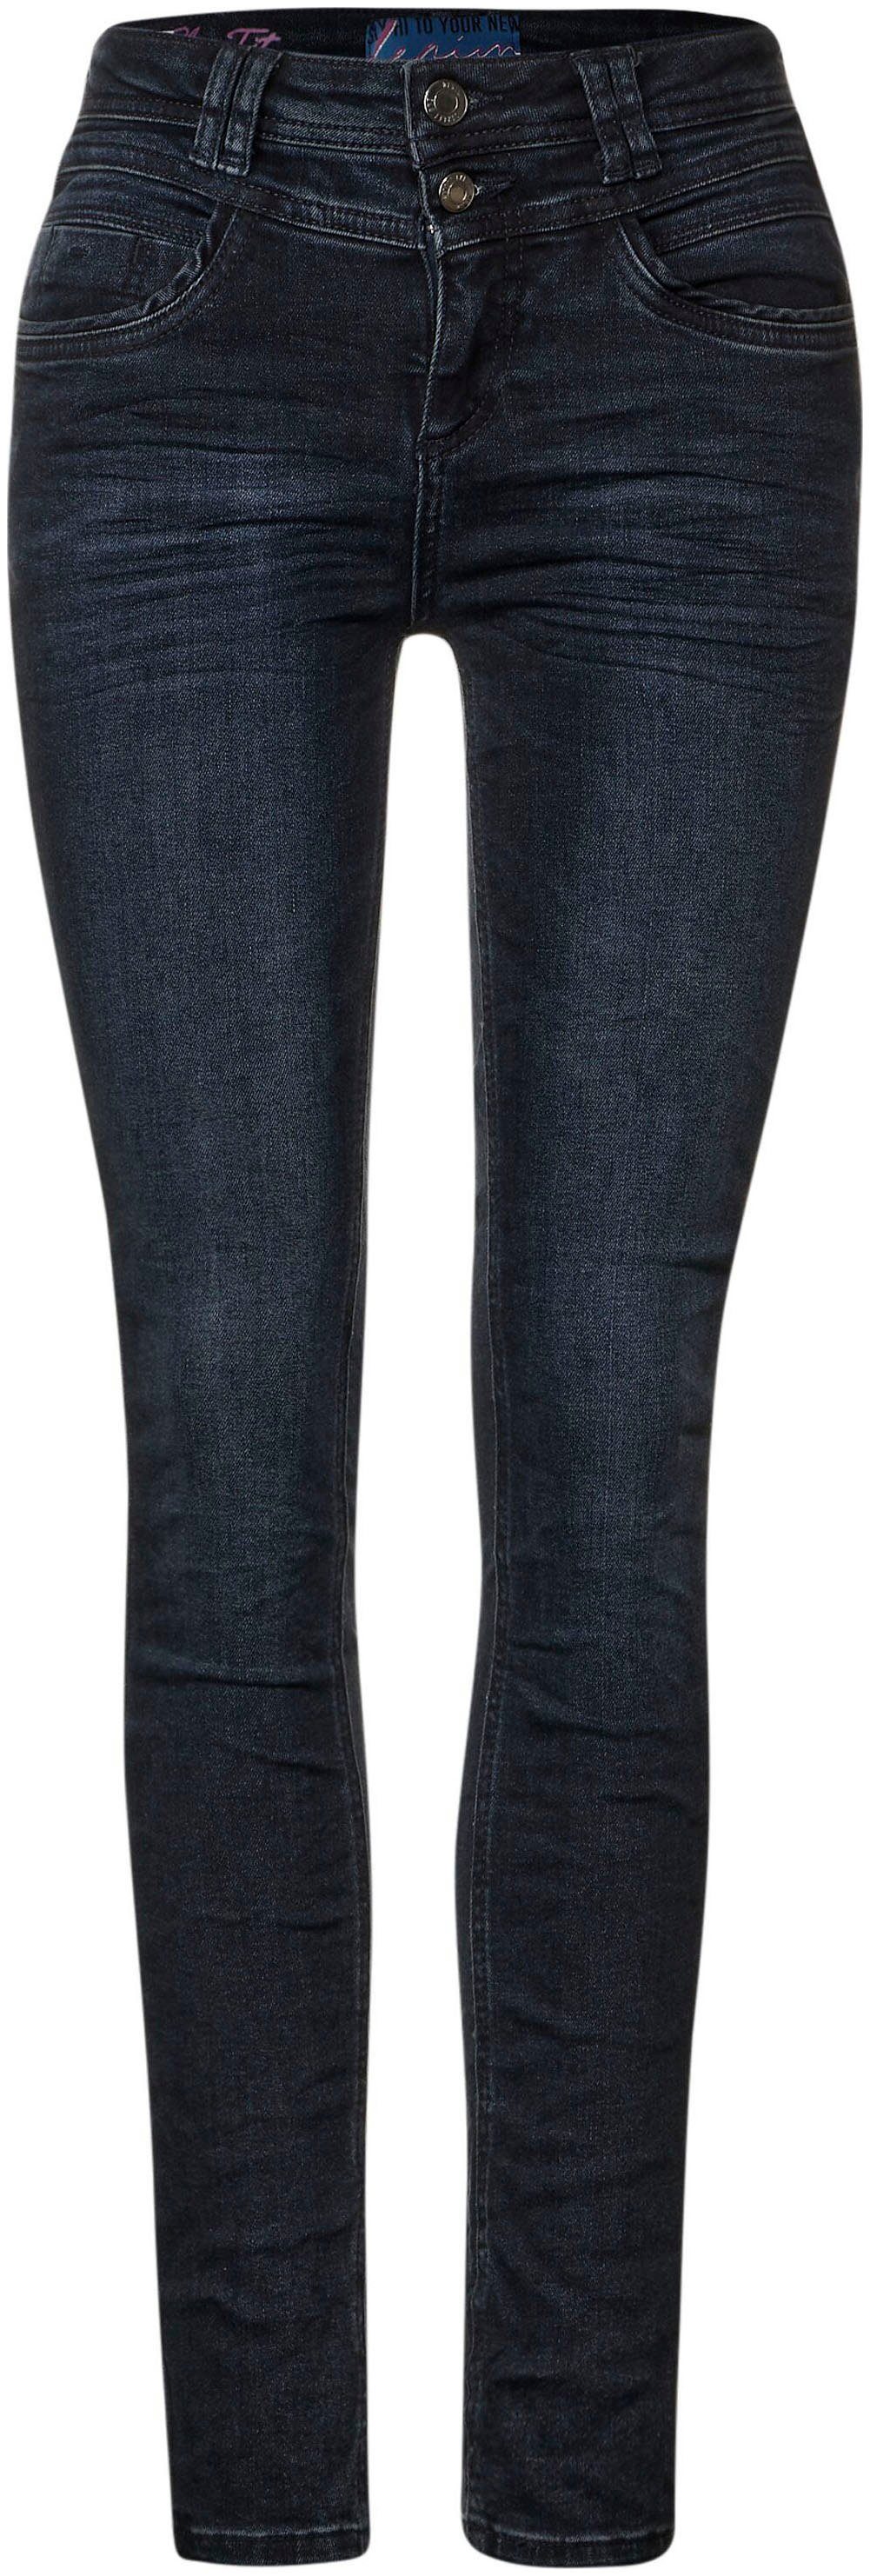 STREET ONE Slim fit jeans in donkere wassing